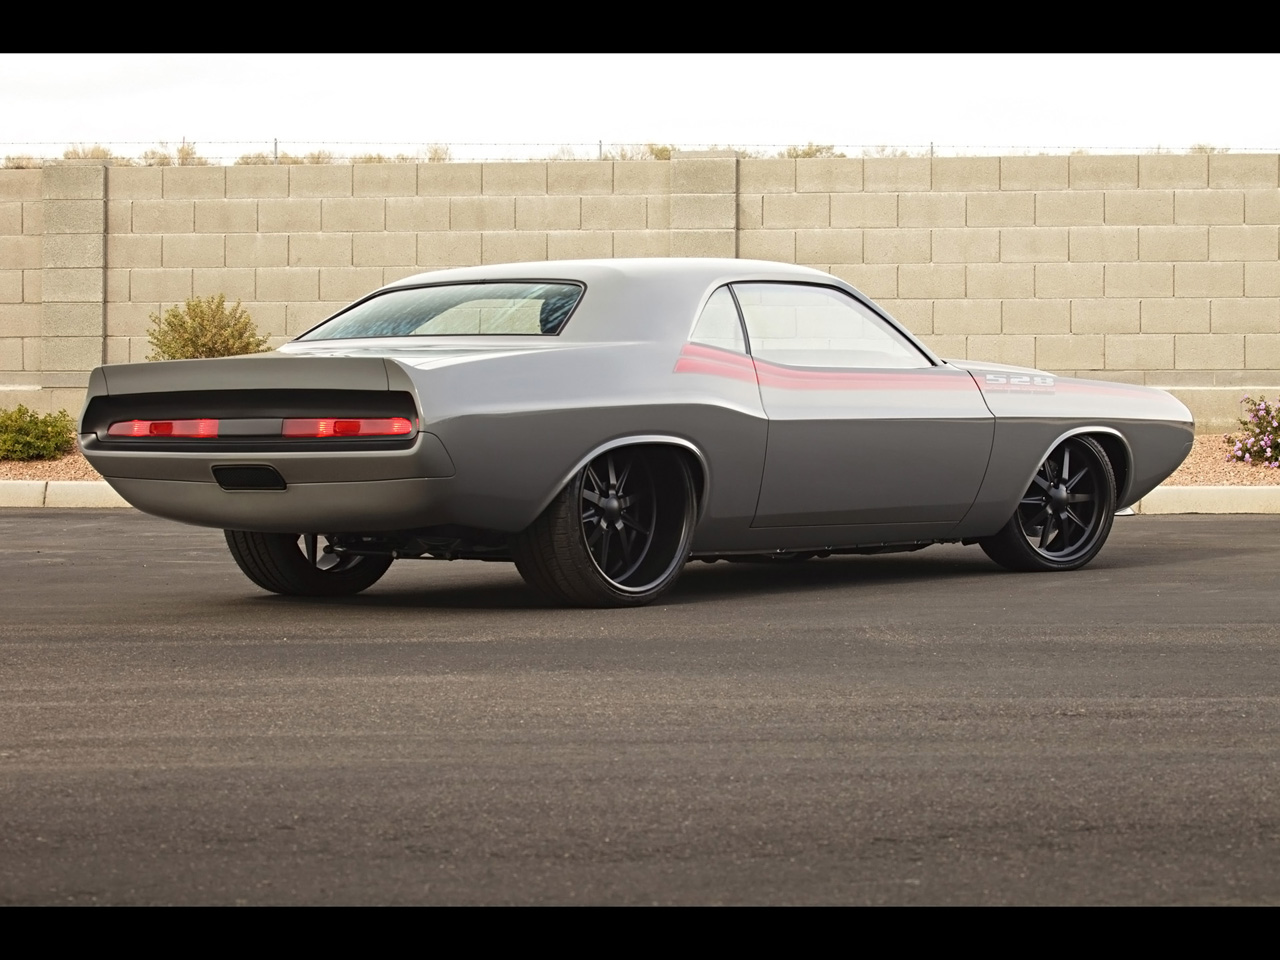 1970-Dodge-Challenger-by-Roadster-Shop-Rear-And-Side-1280x960.jpg